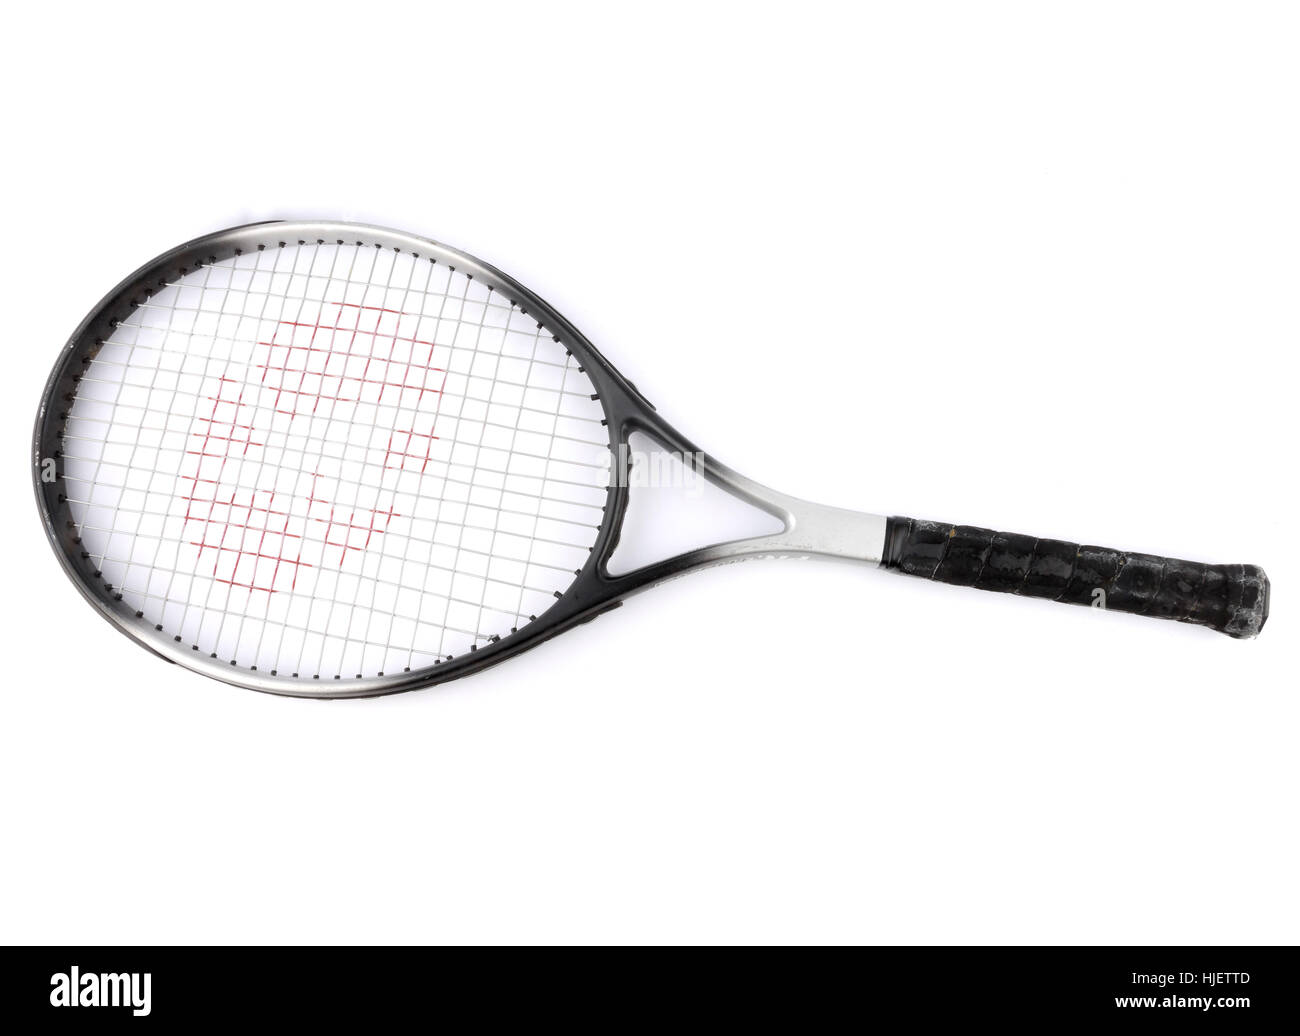 Tennis racket cut out isolated on white background Stock Photo